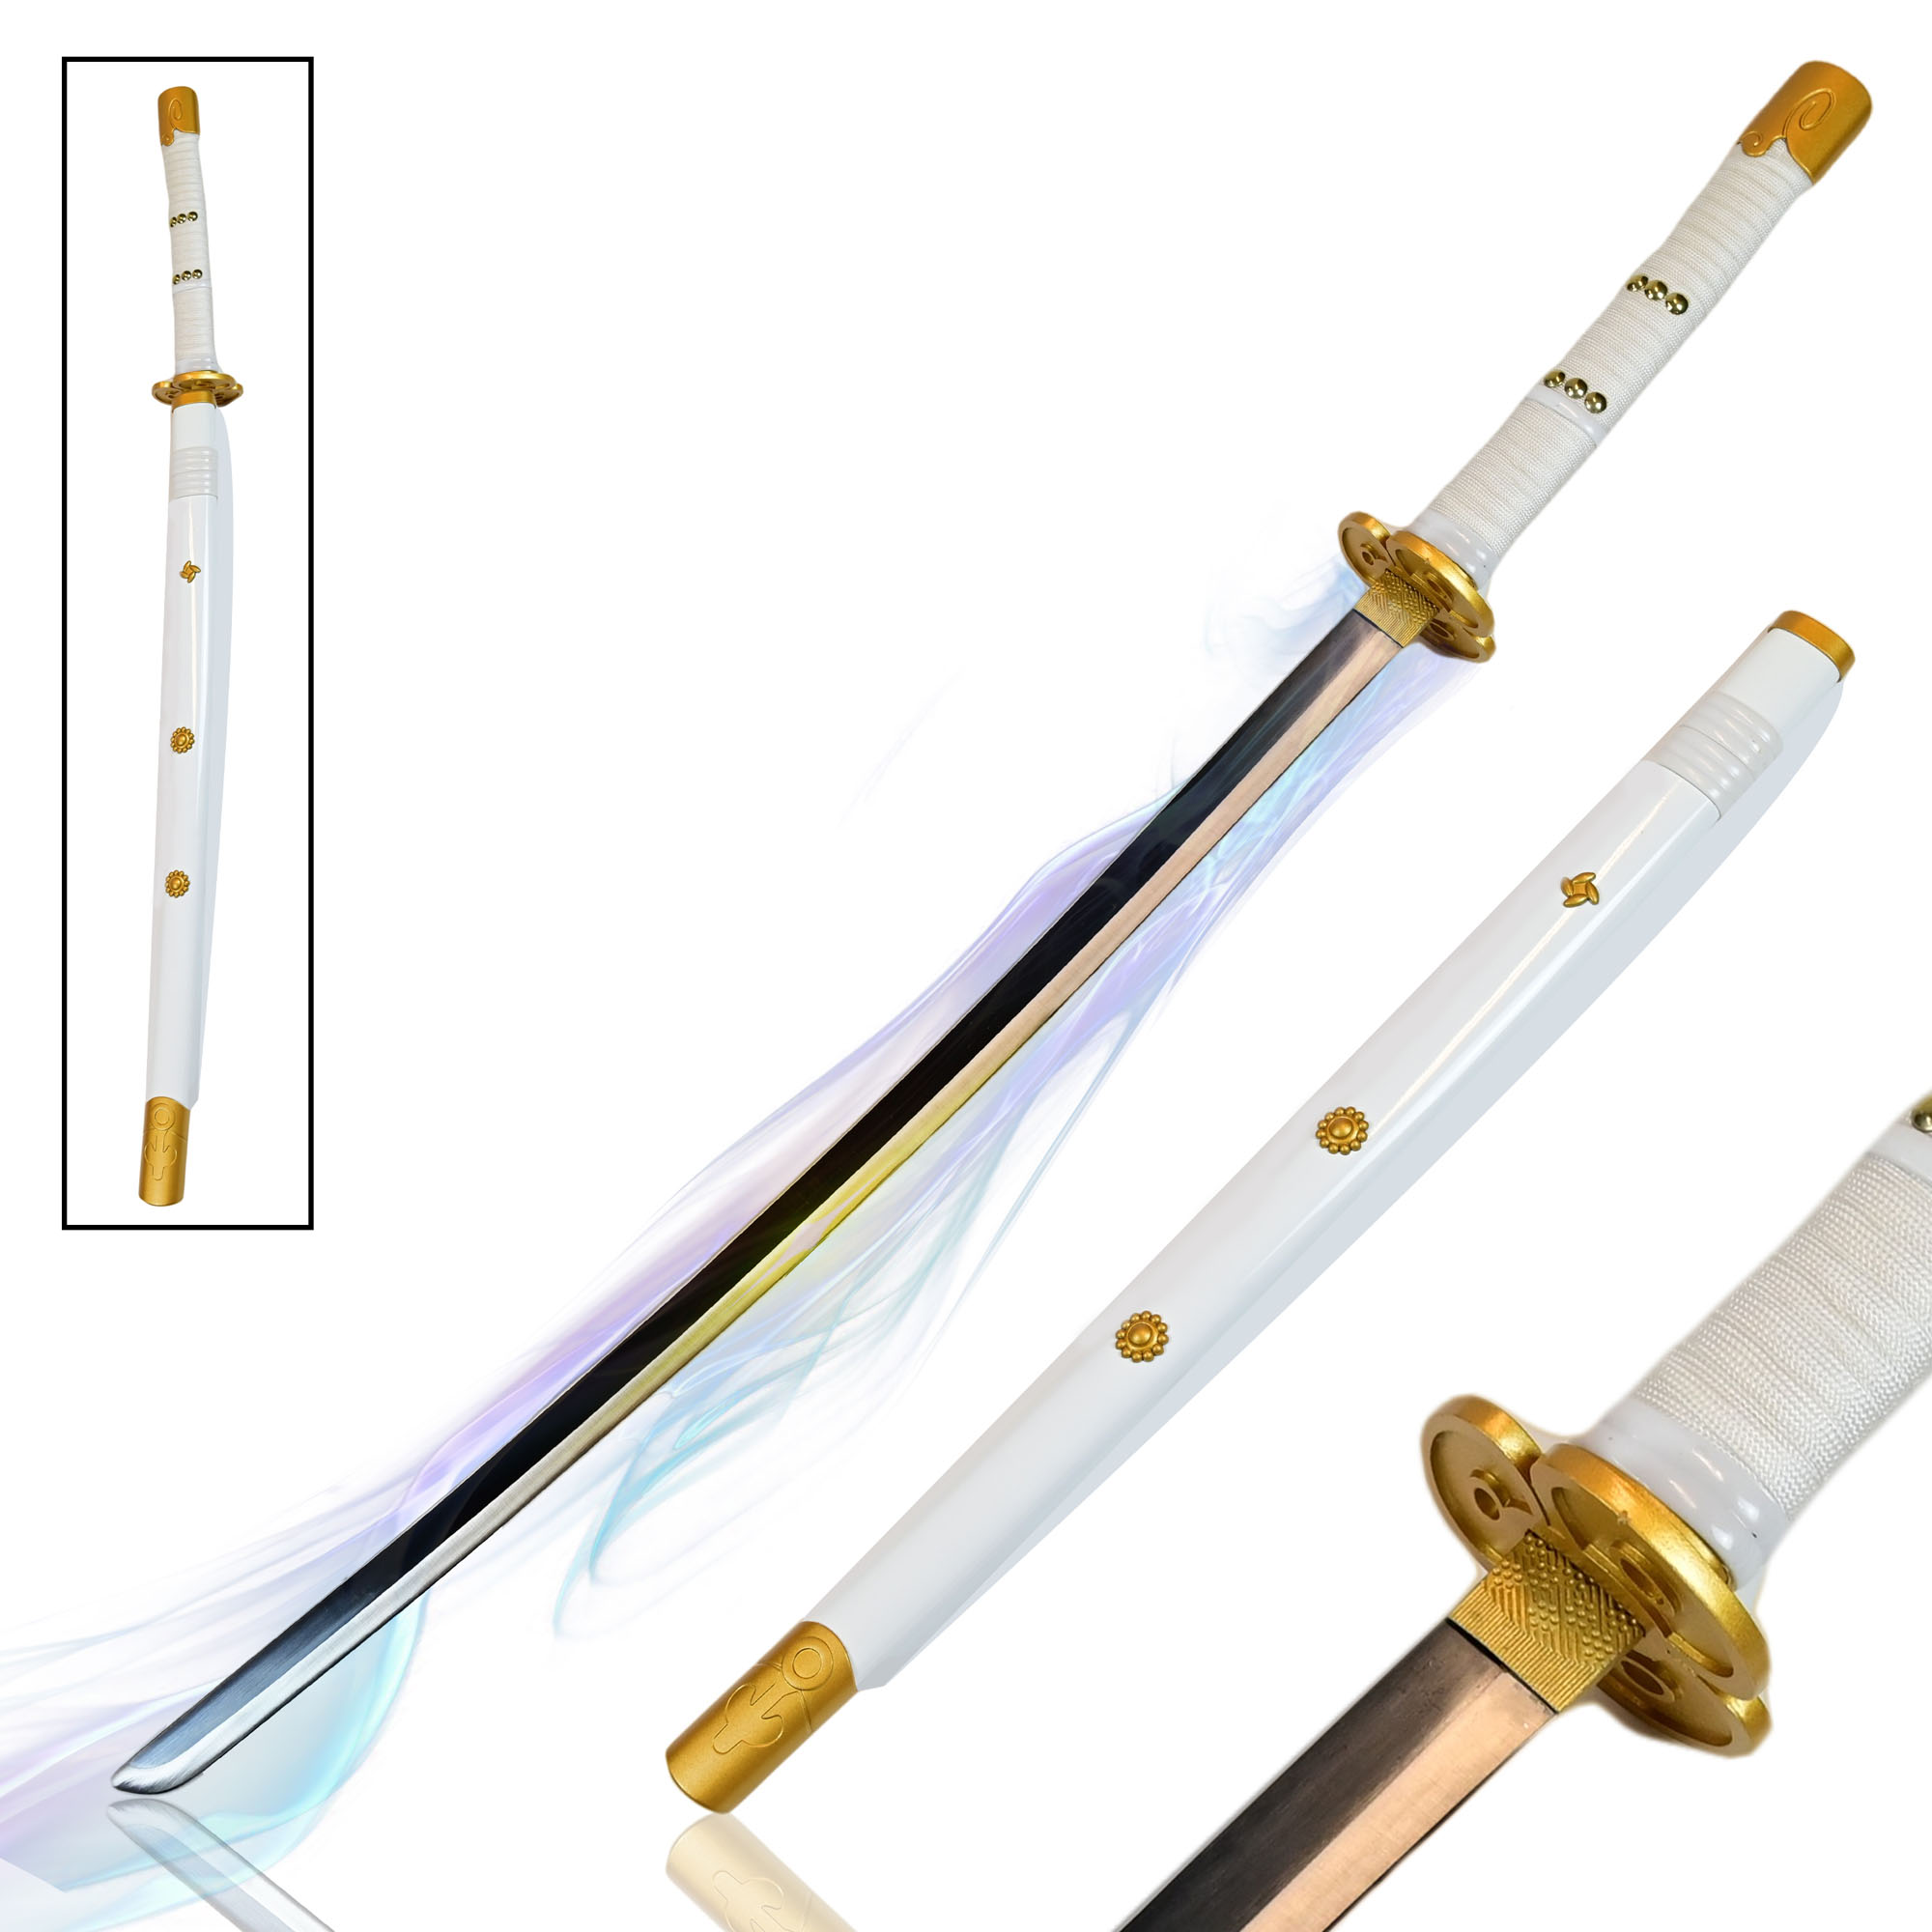 One Piece - Oden's Ame No Habakiri Sword